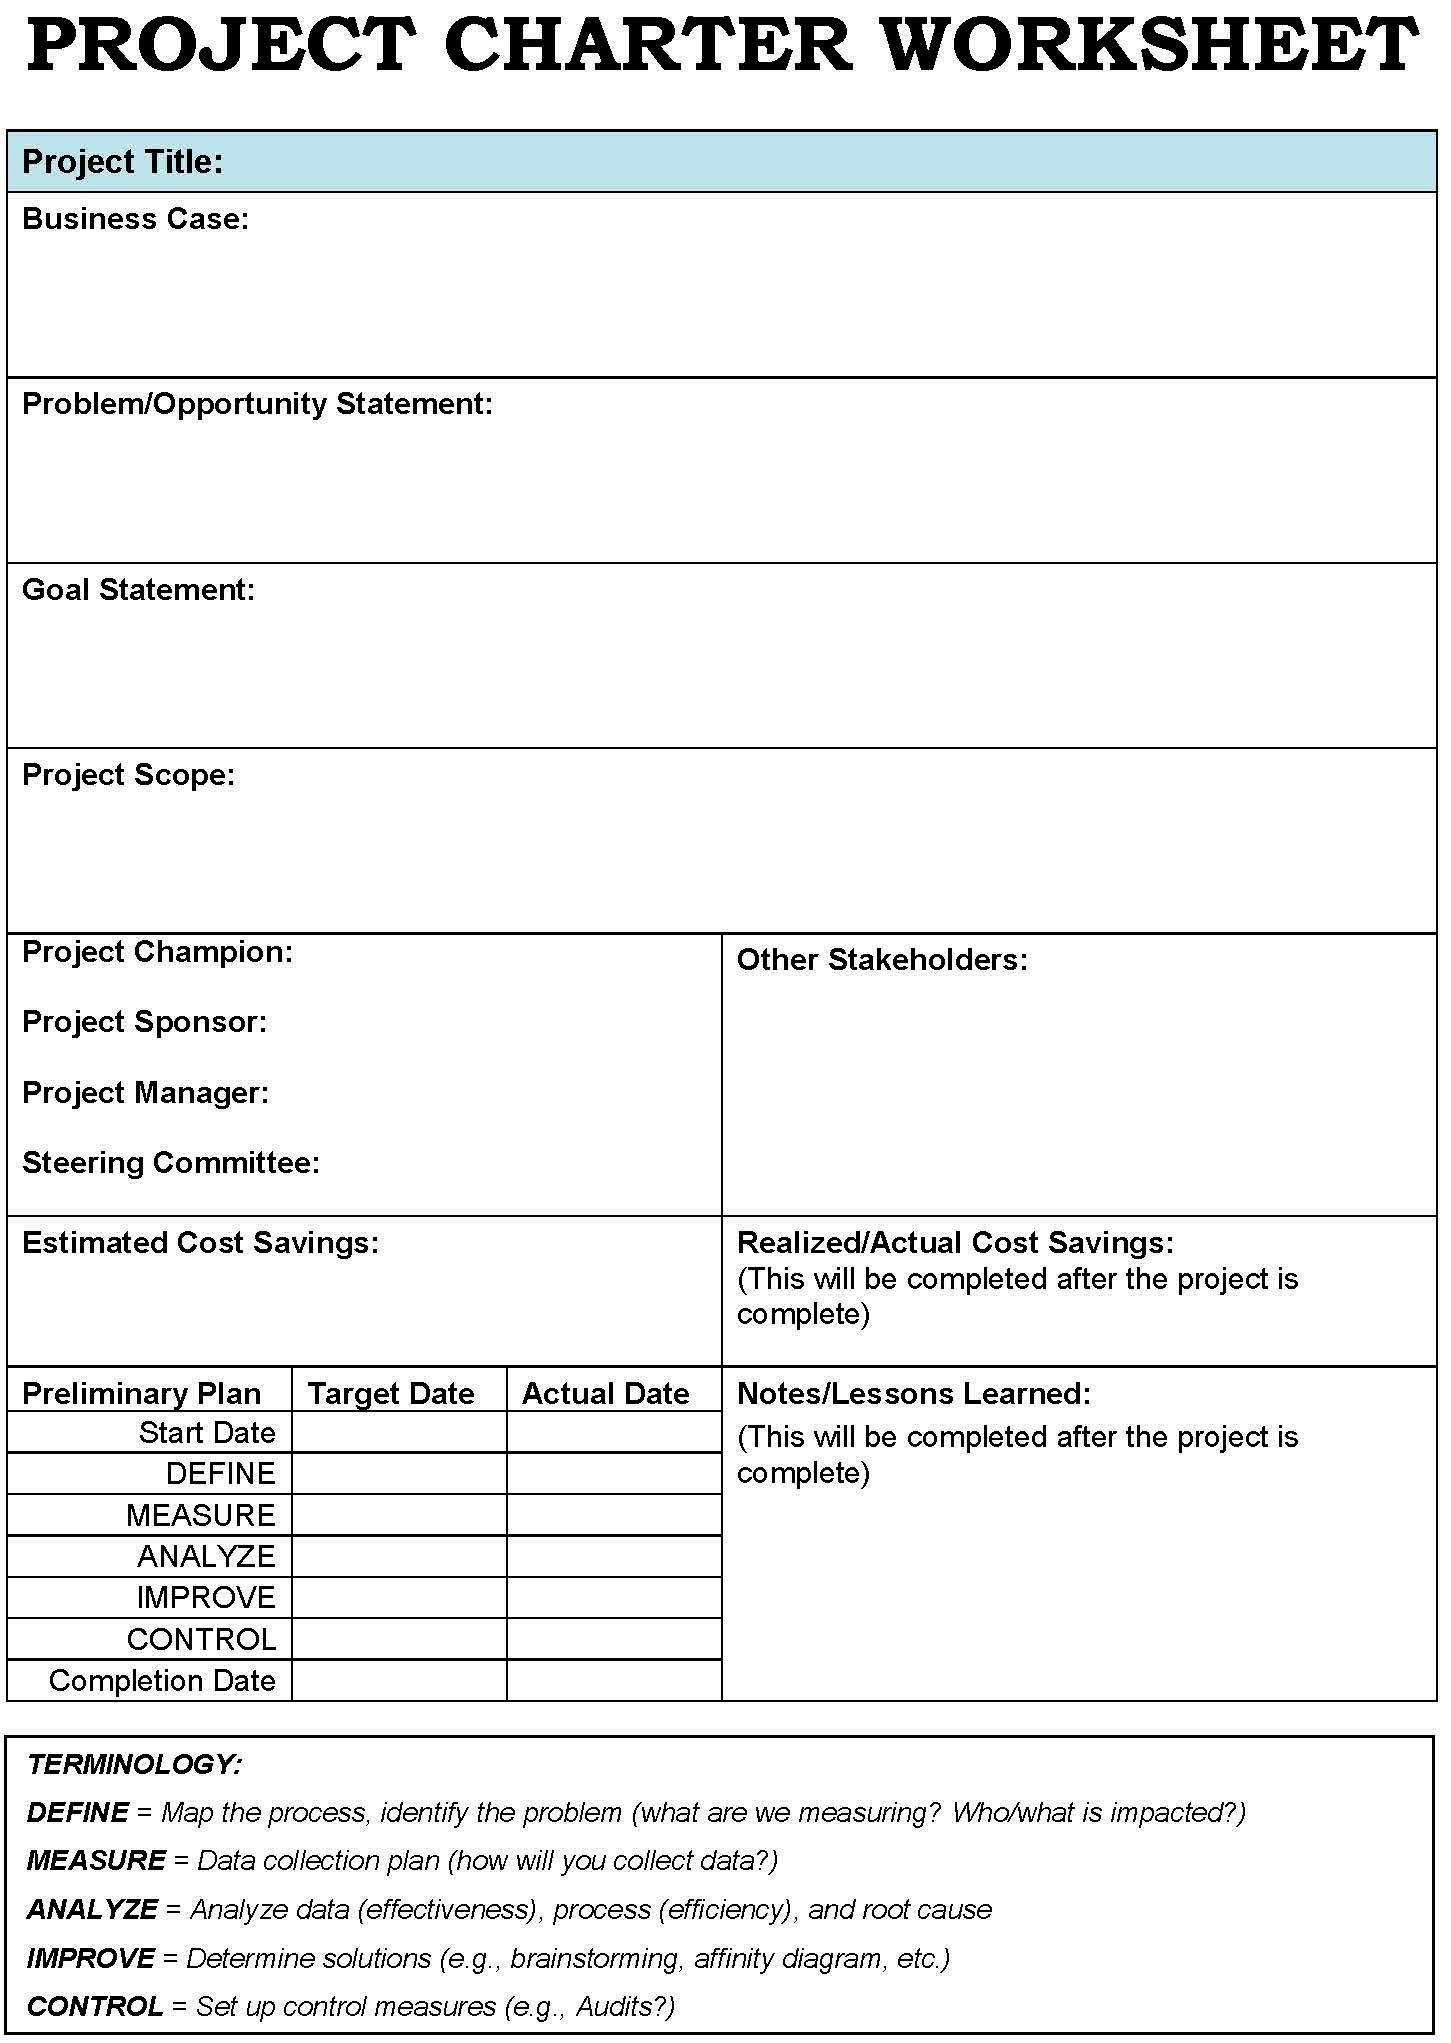 Project Charter Templates Google Search Project Regarding Proportions 1451 X 2043 